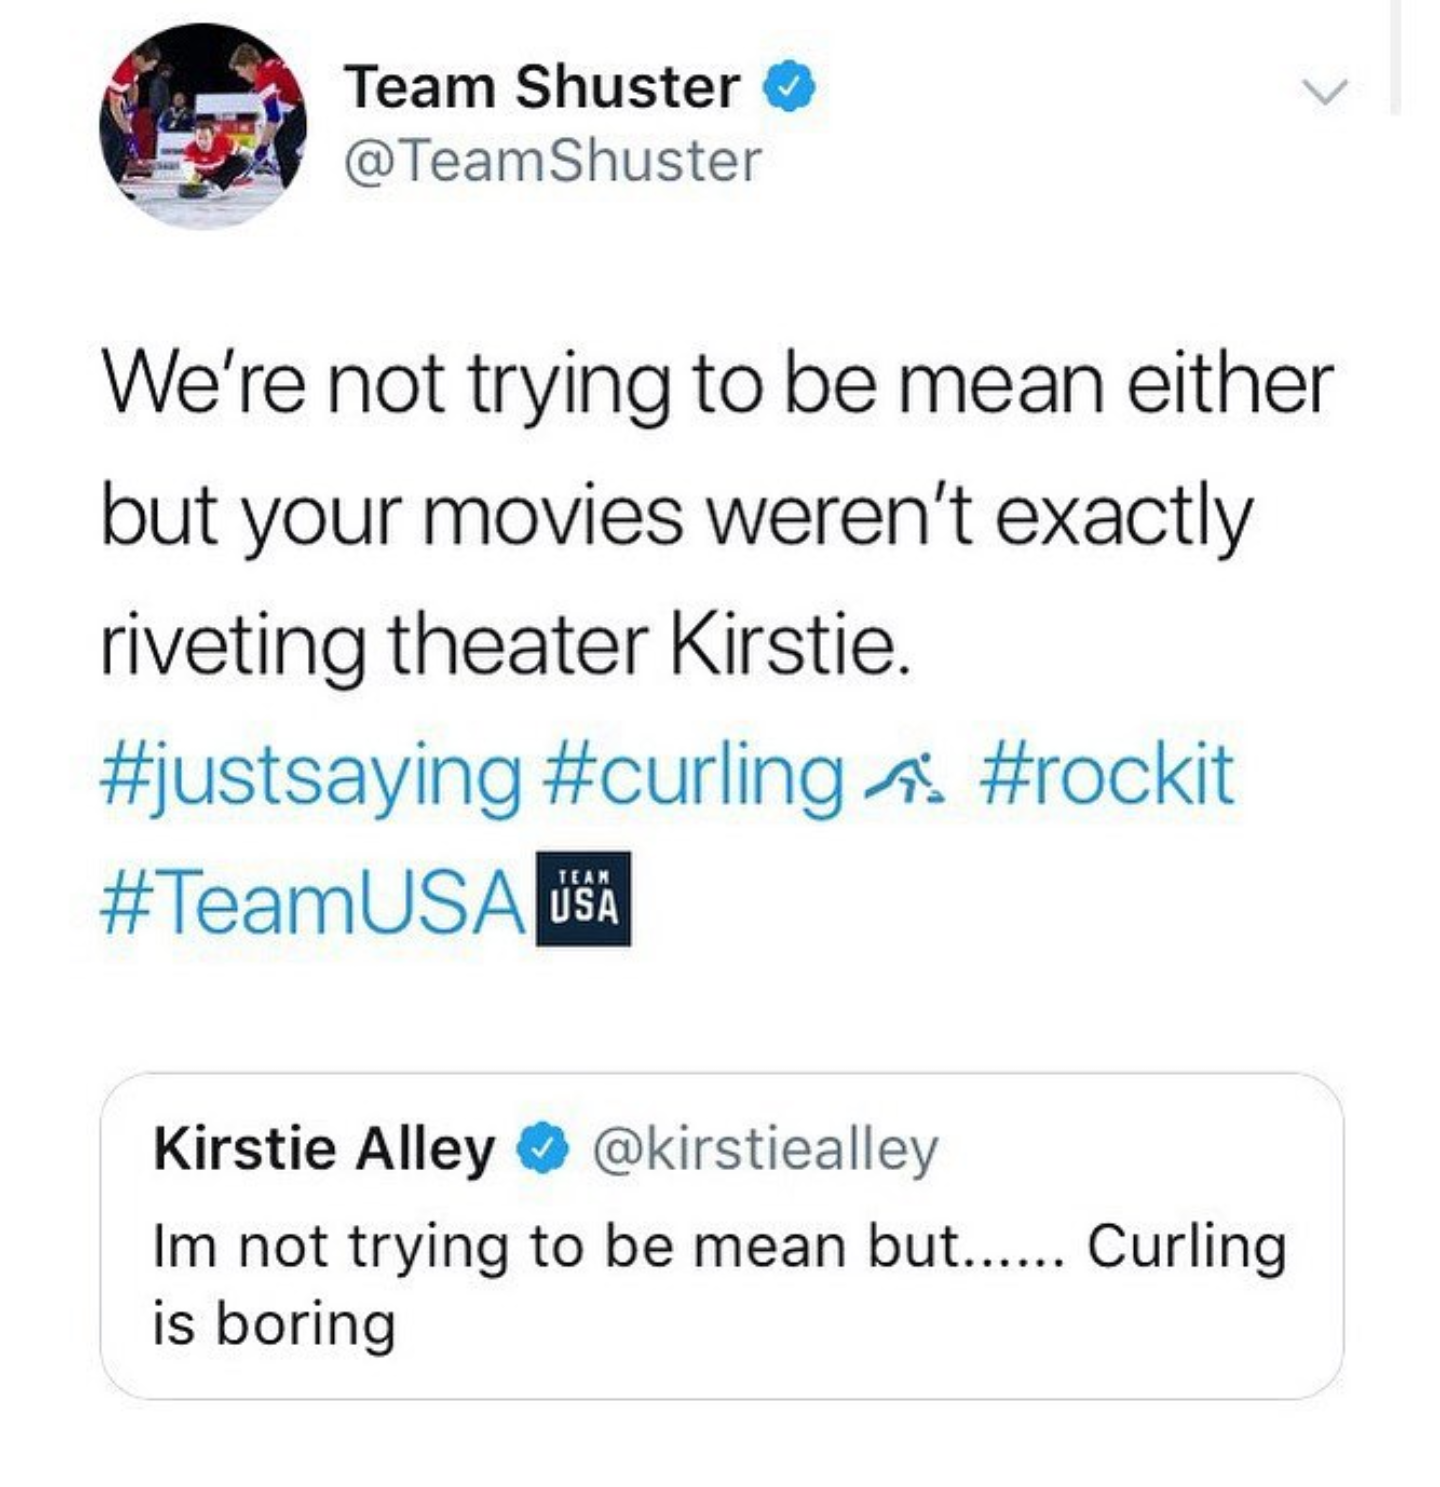 hood niggas are better than - Team Shuster We're not trying to be mean either but your movies weren't exactly riveting theater Kirstie. Usa Kirstie Alley Im not trying to be mean but...... Curling is boring